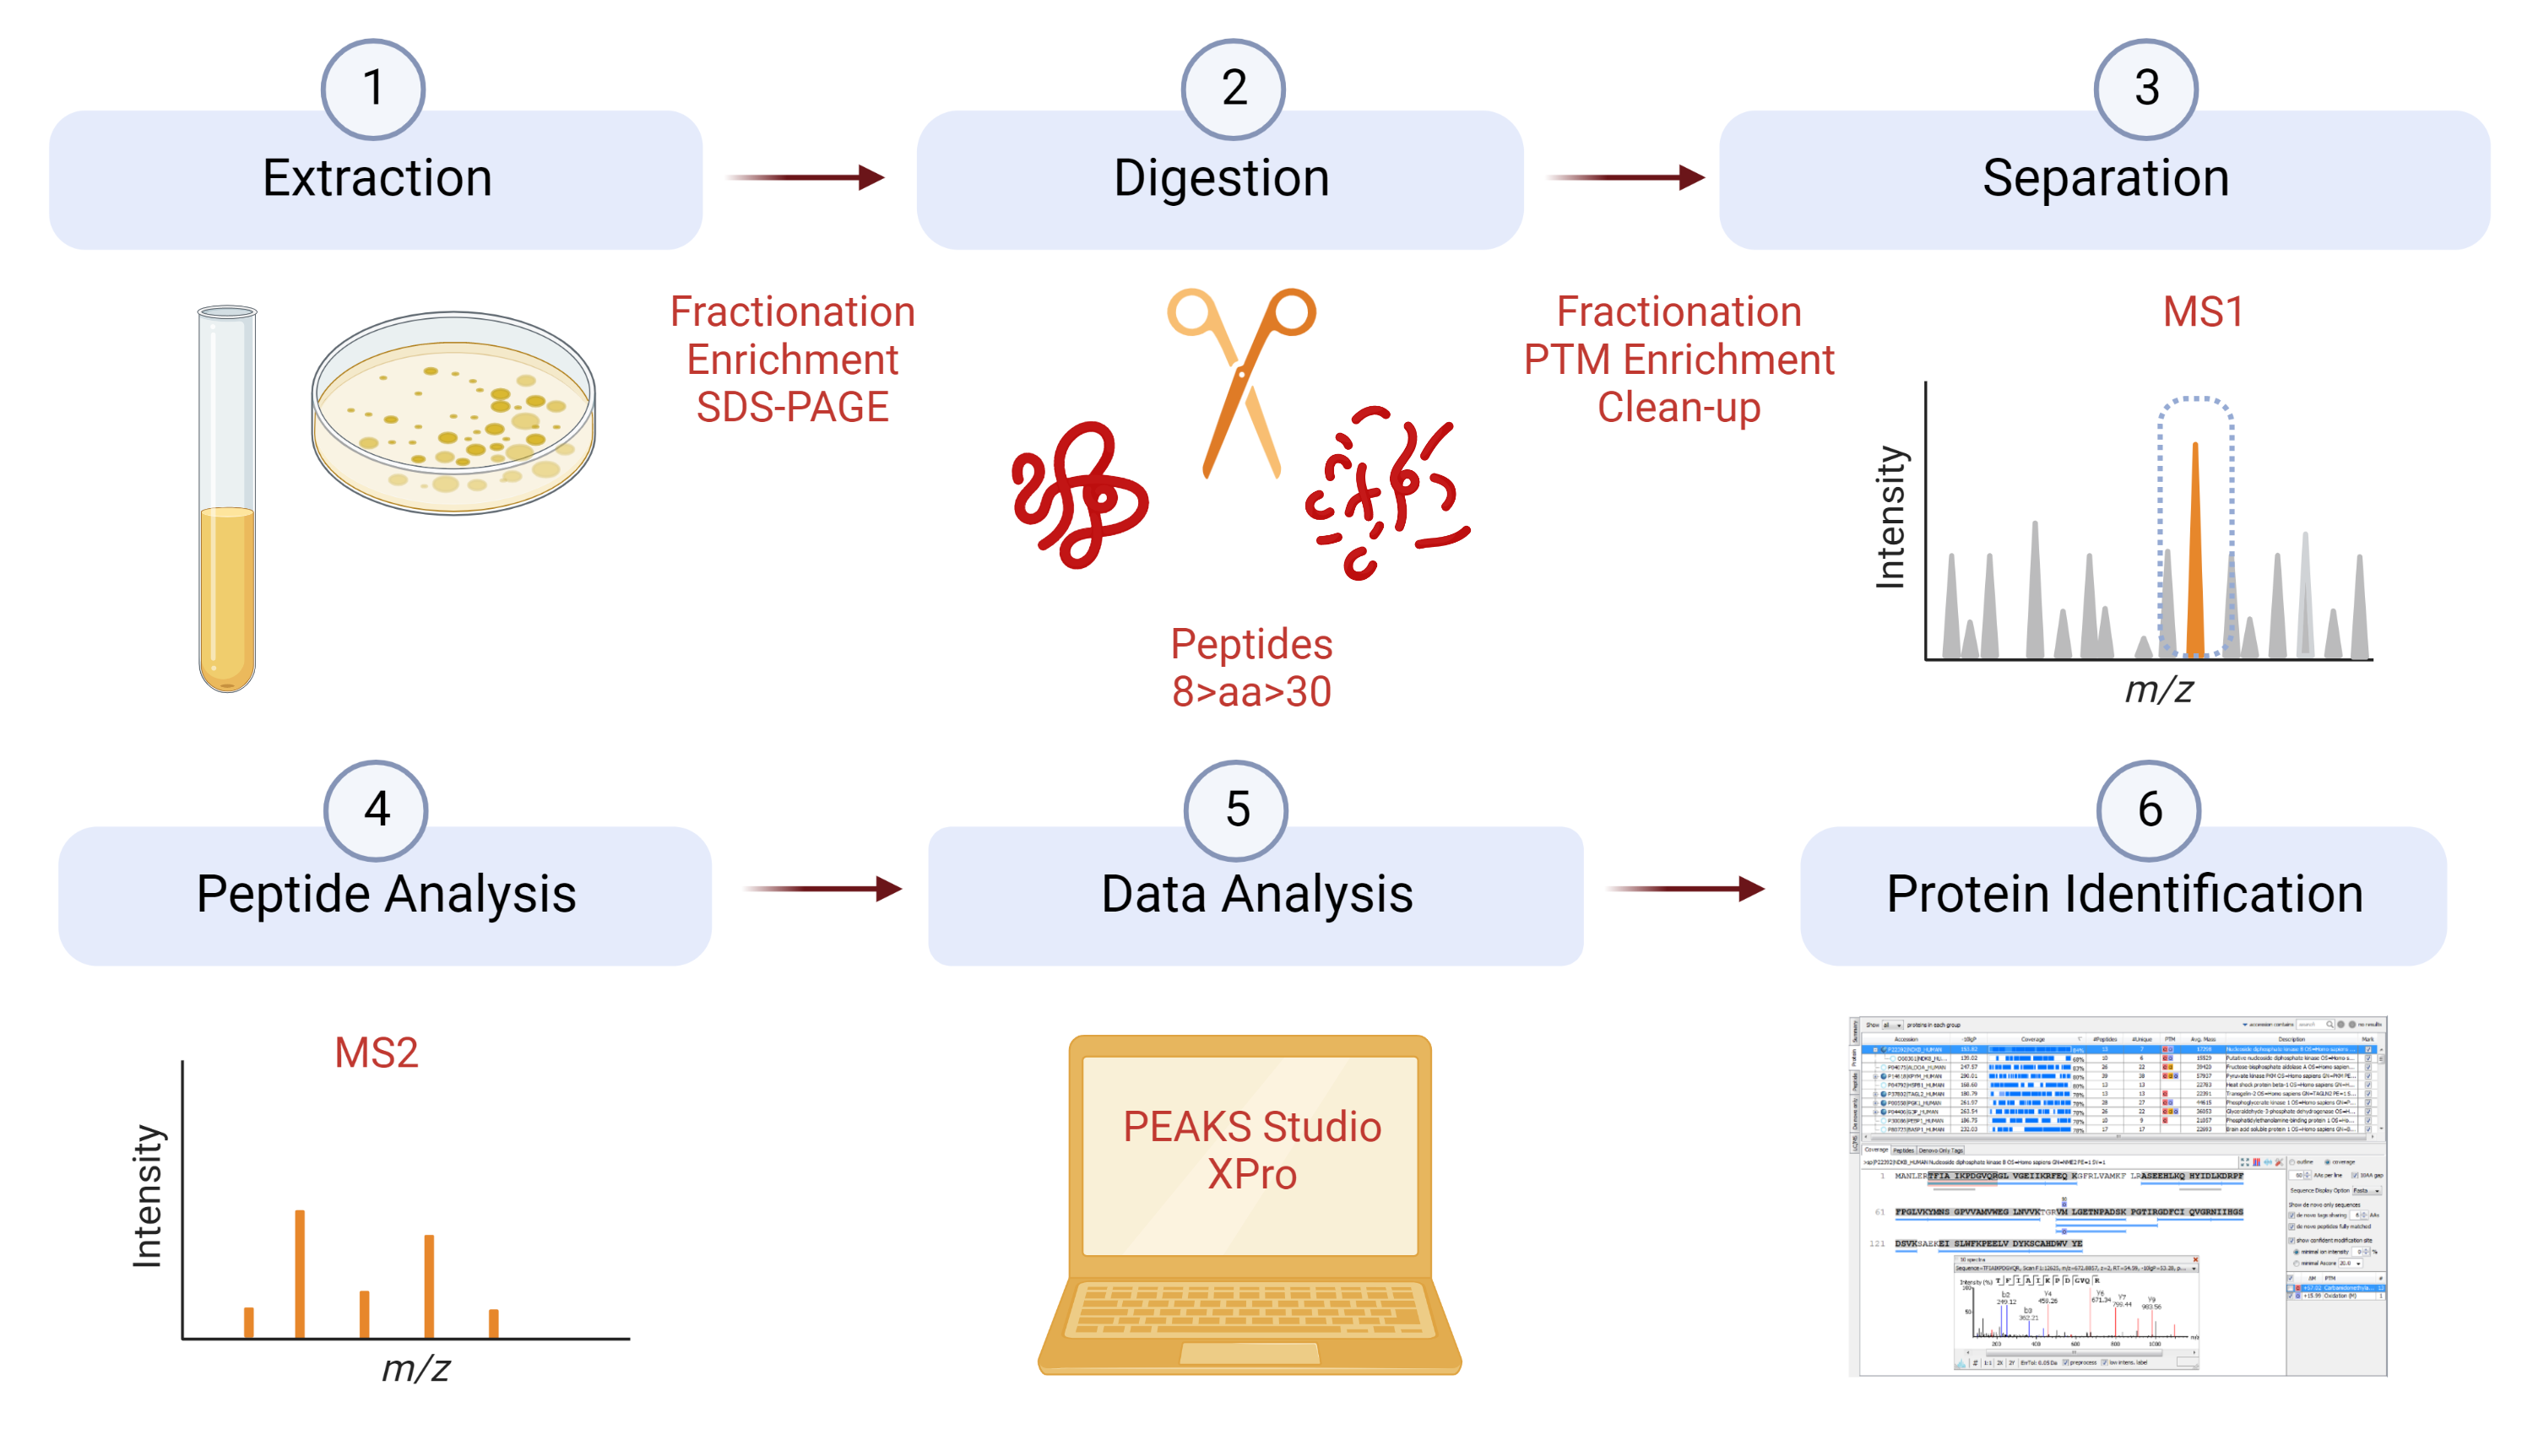 Workflow for protein identification.Proteins are extracted and can be fractionaled,enriched or separated on a gel followed by digestion with protease into small peptides between 8 and 30 aminoacids. These peptides can first be enriched or fractionaled followed by a clean-up and then separated using chromatography and detected by mass spectrometry and fragmented. The data is then analyzed using Peaks 10.0 software and compared to protein databases which leads to protein identification. 